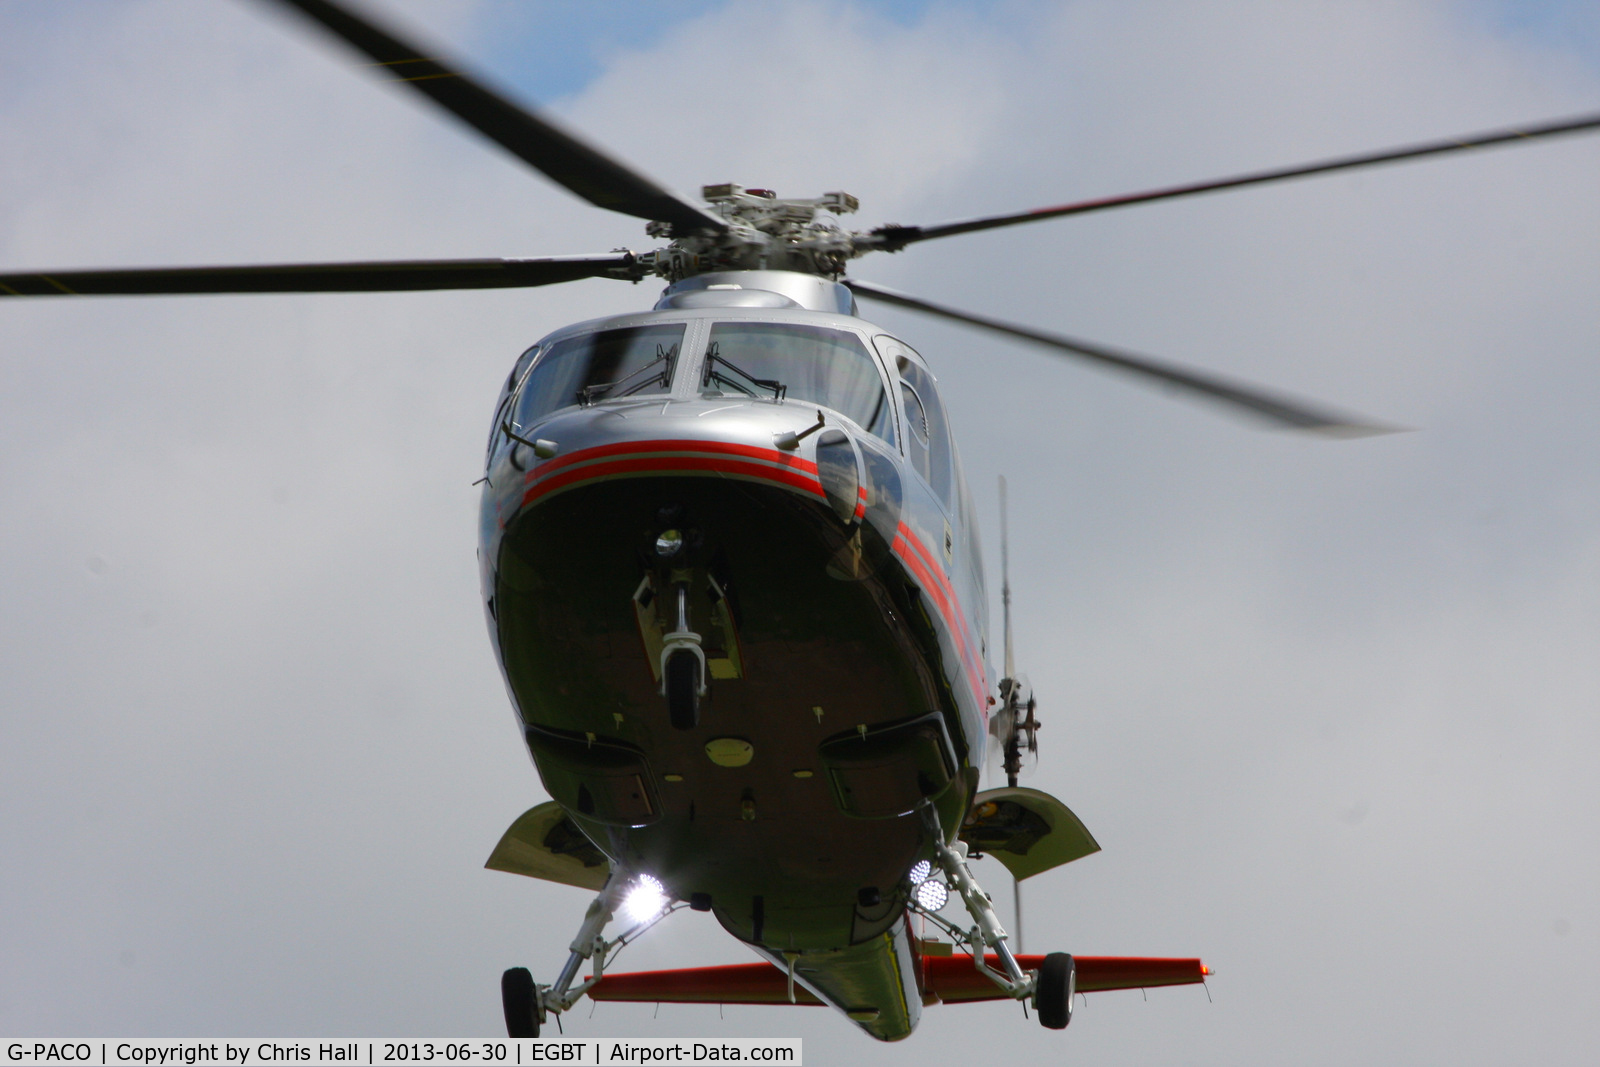 G-PACO, 2009 Sikorsky S-76C C/N 760782, being used for ferrying race fans to the British F1 Grand Prix at Silverstone